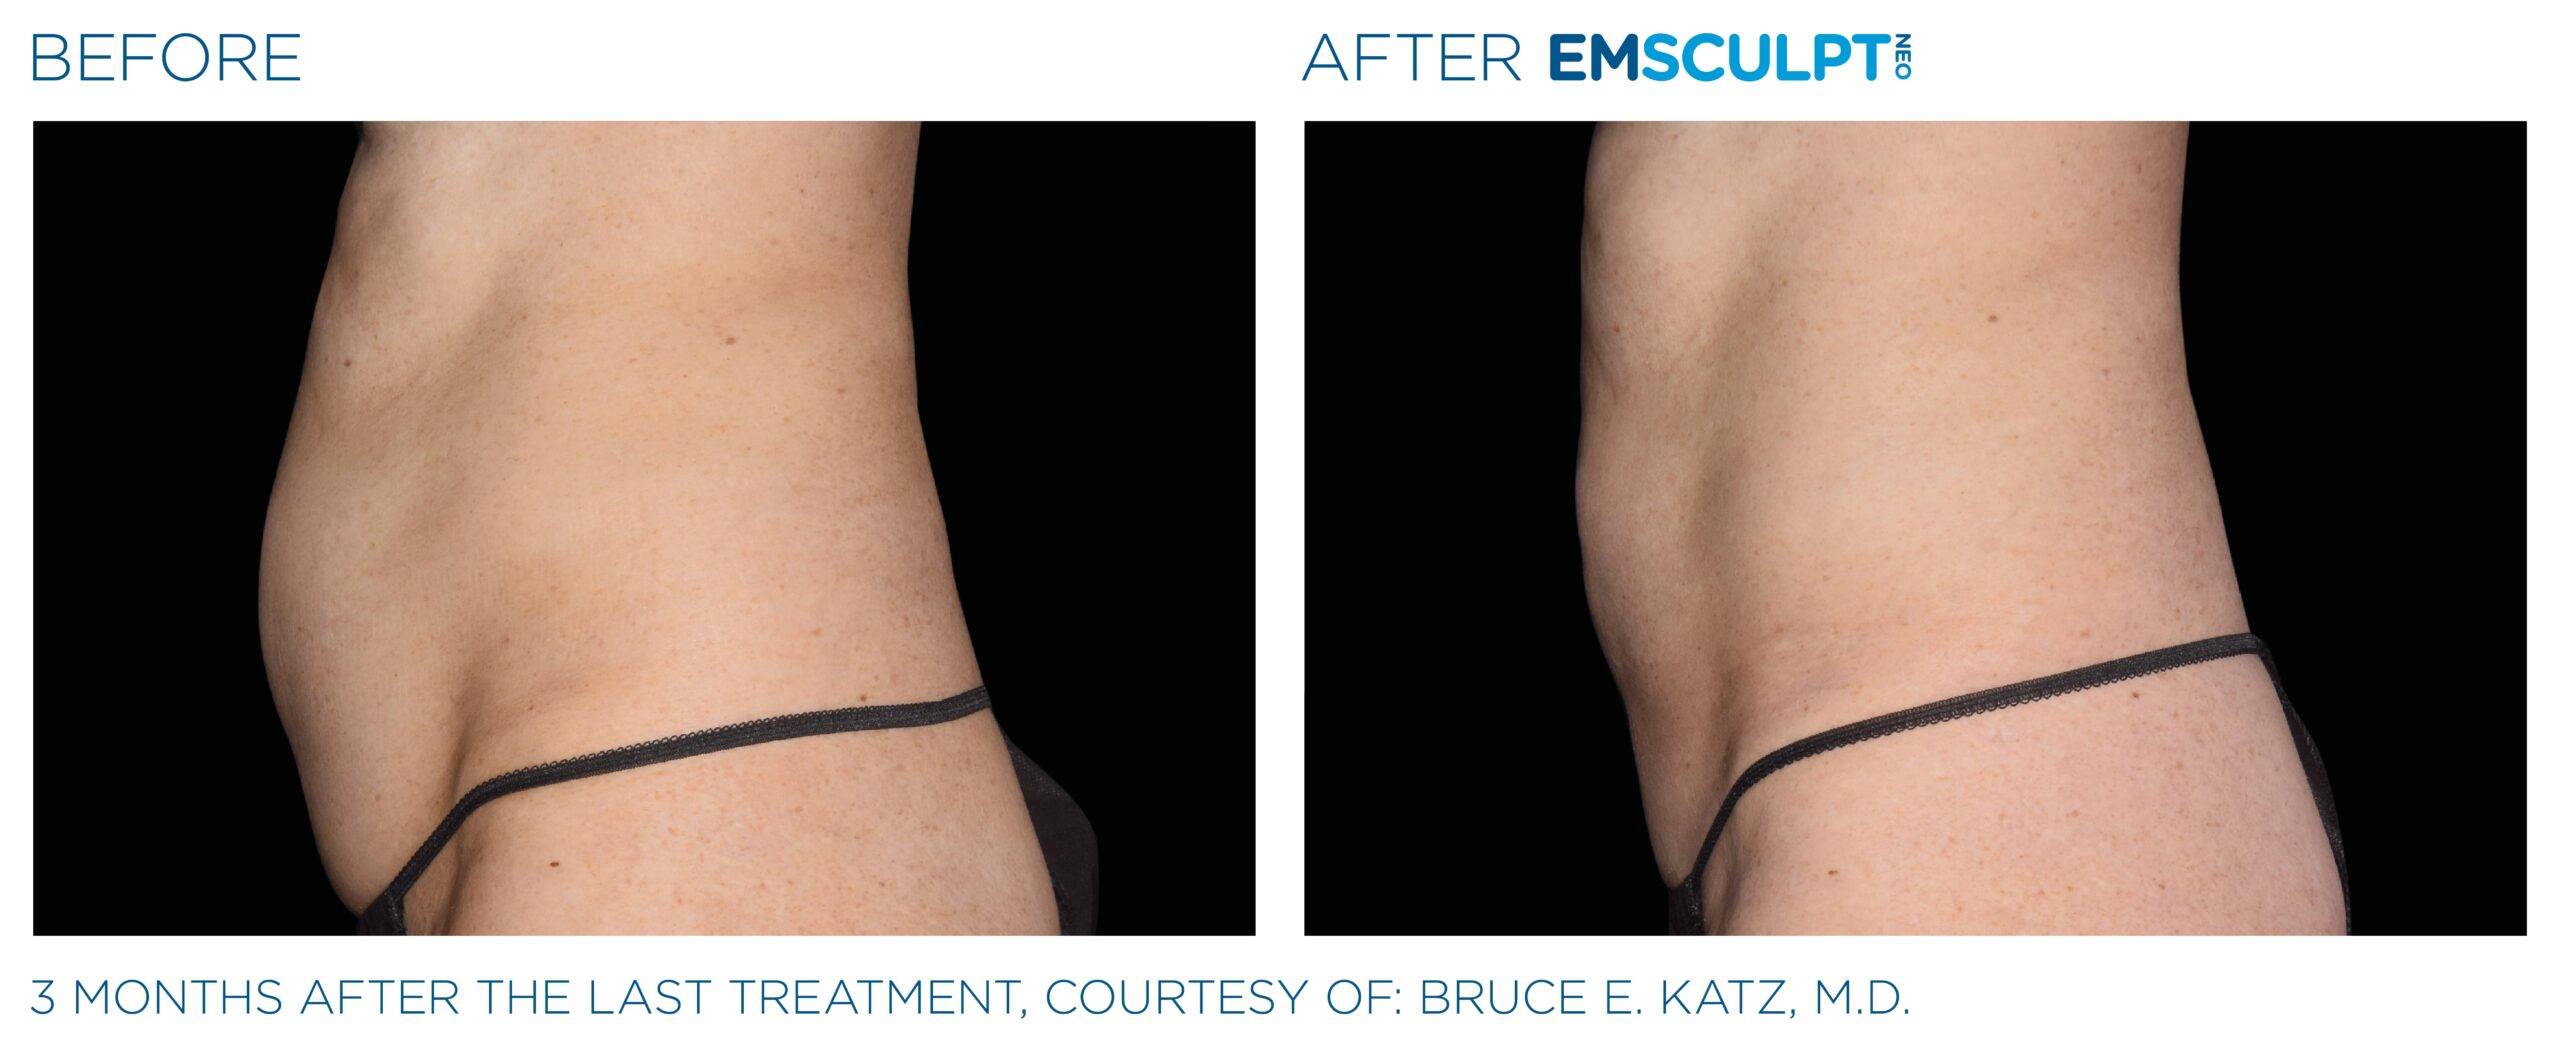 What Is the Best Emsculpt Cost in San Diego? - A New You Aesthetics